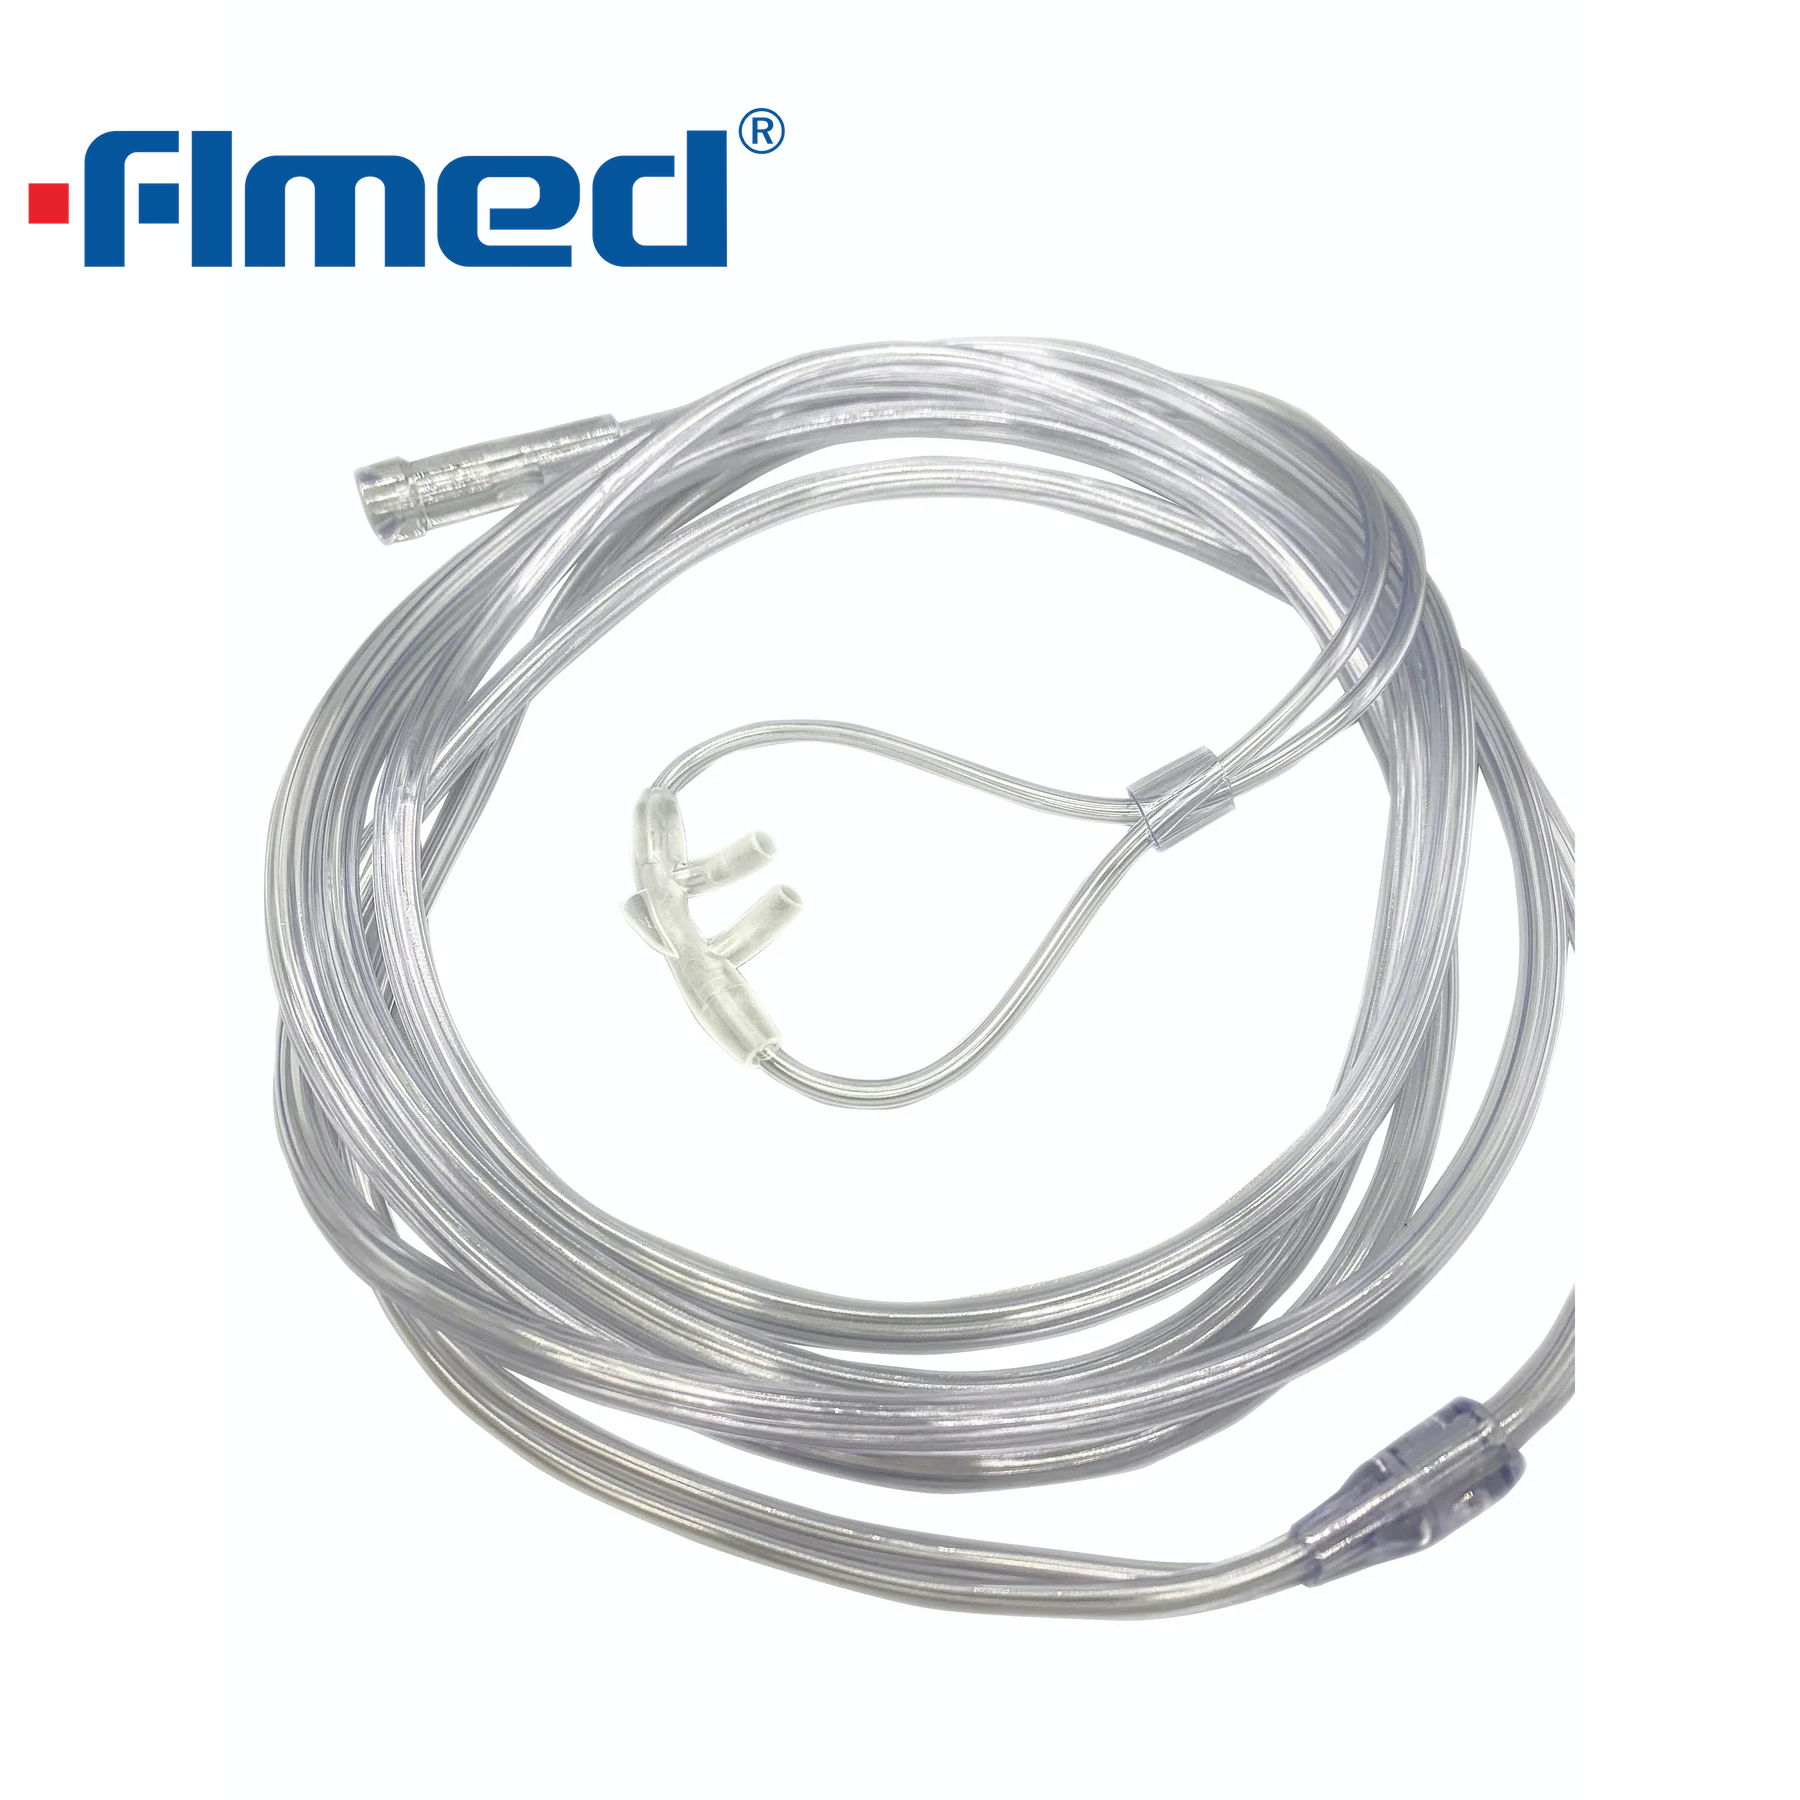 Nasal Cannula with Oxygen Supply Tubing (7 Foot)